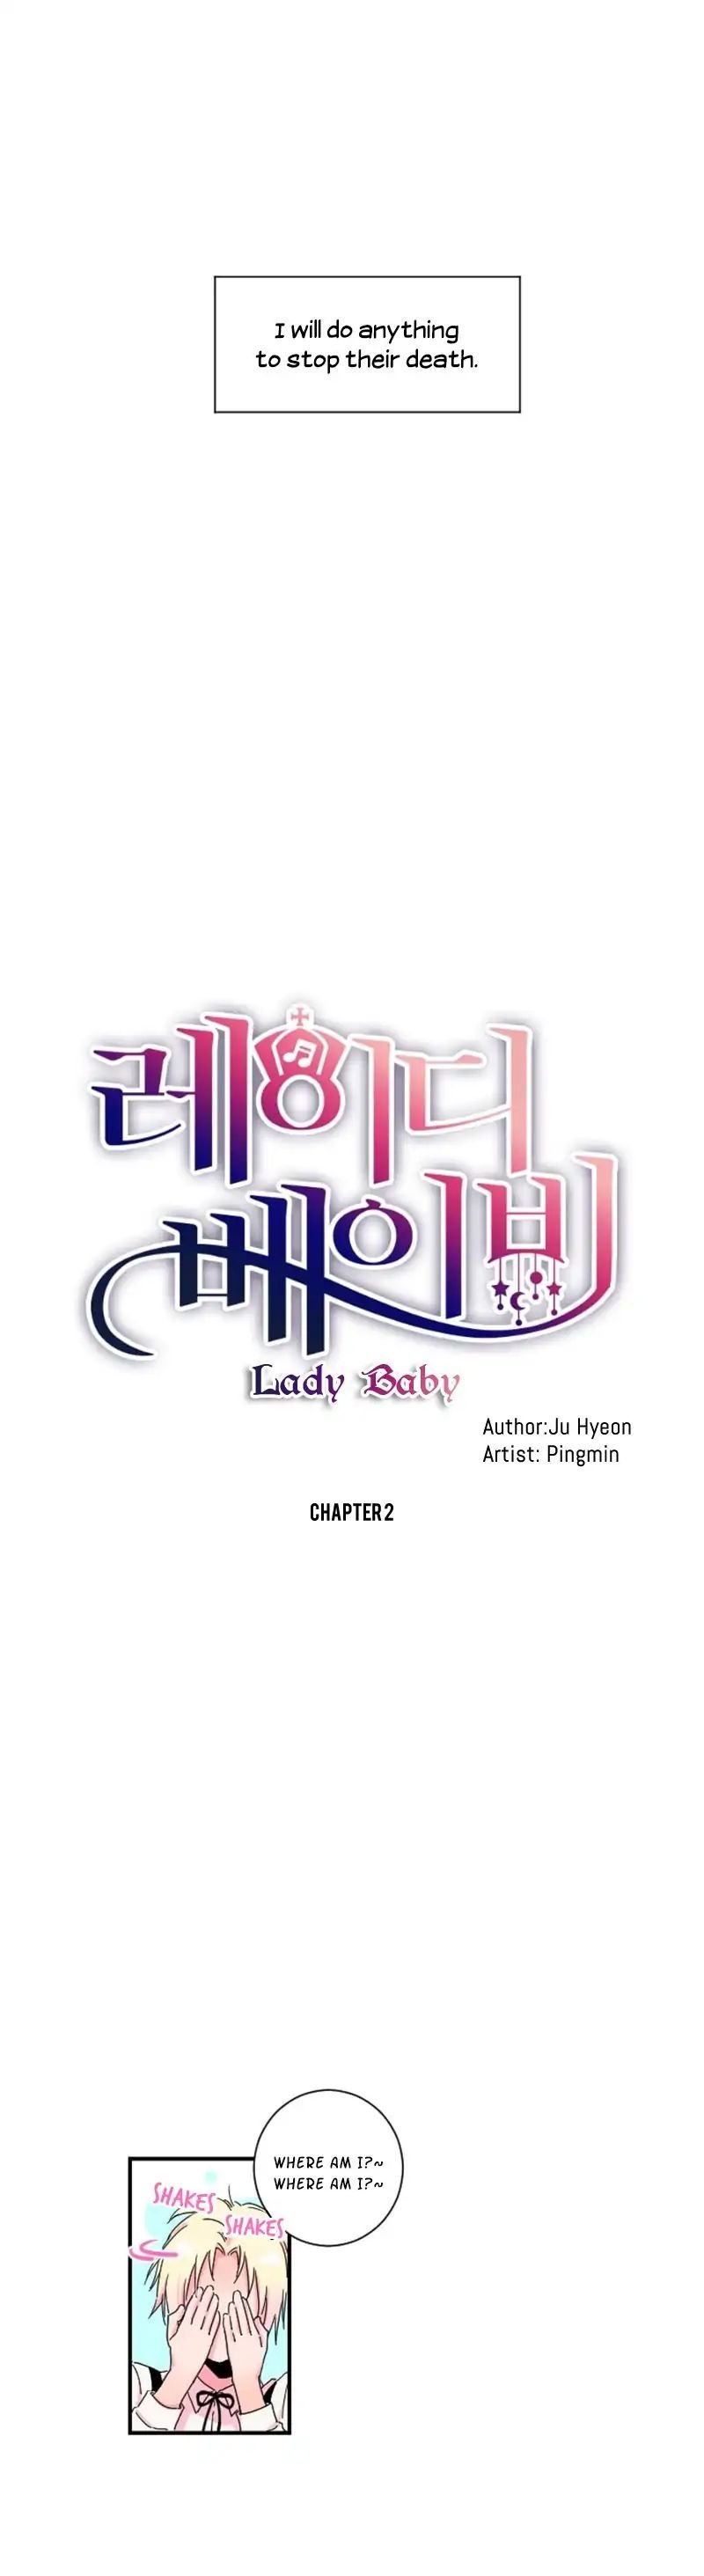 Lady Baby chapter 2